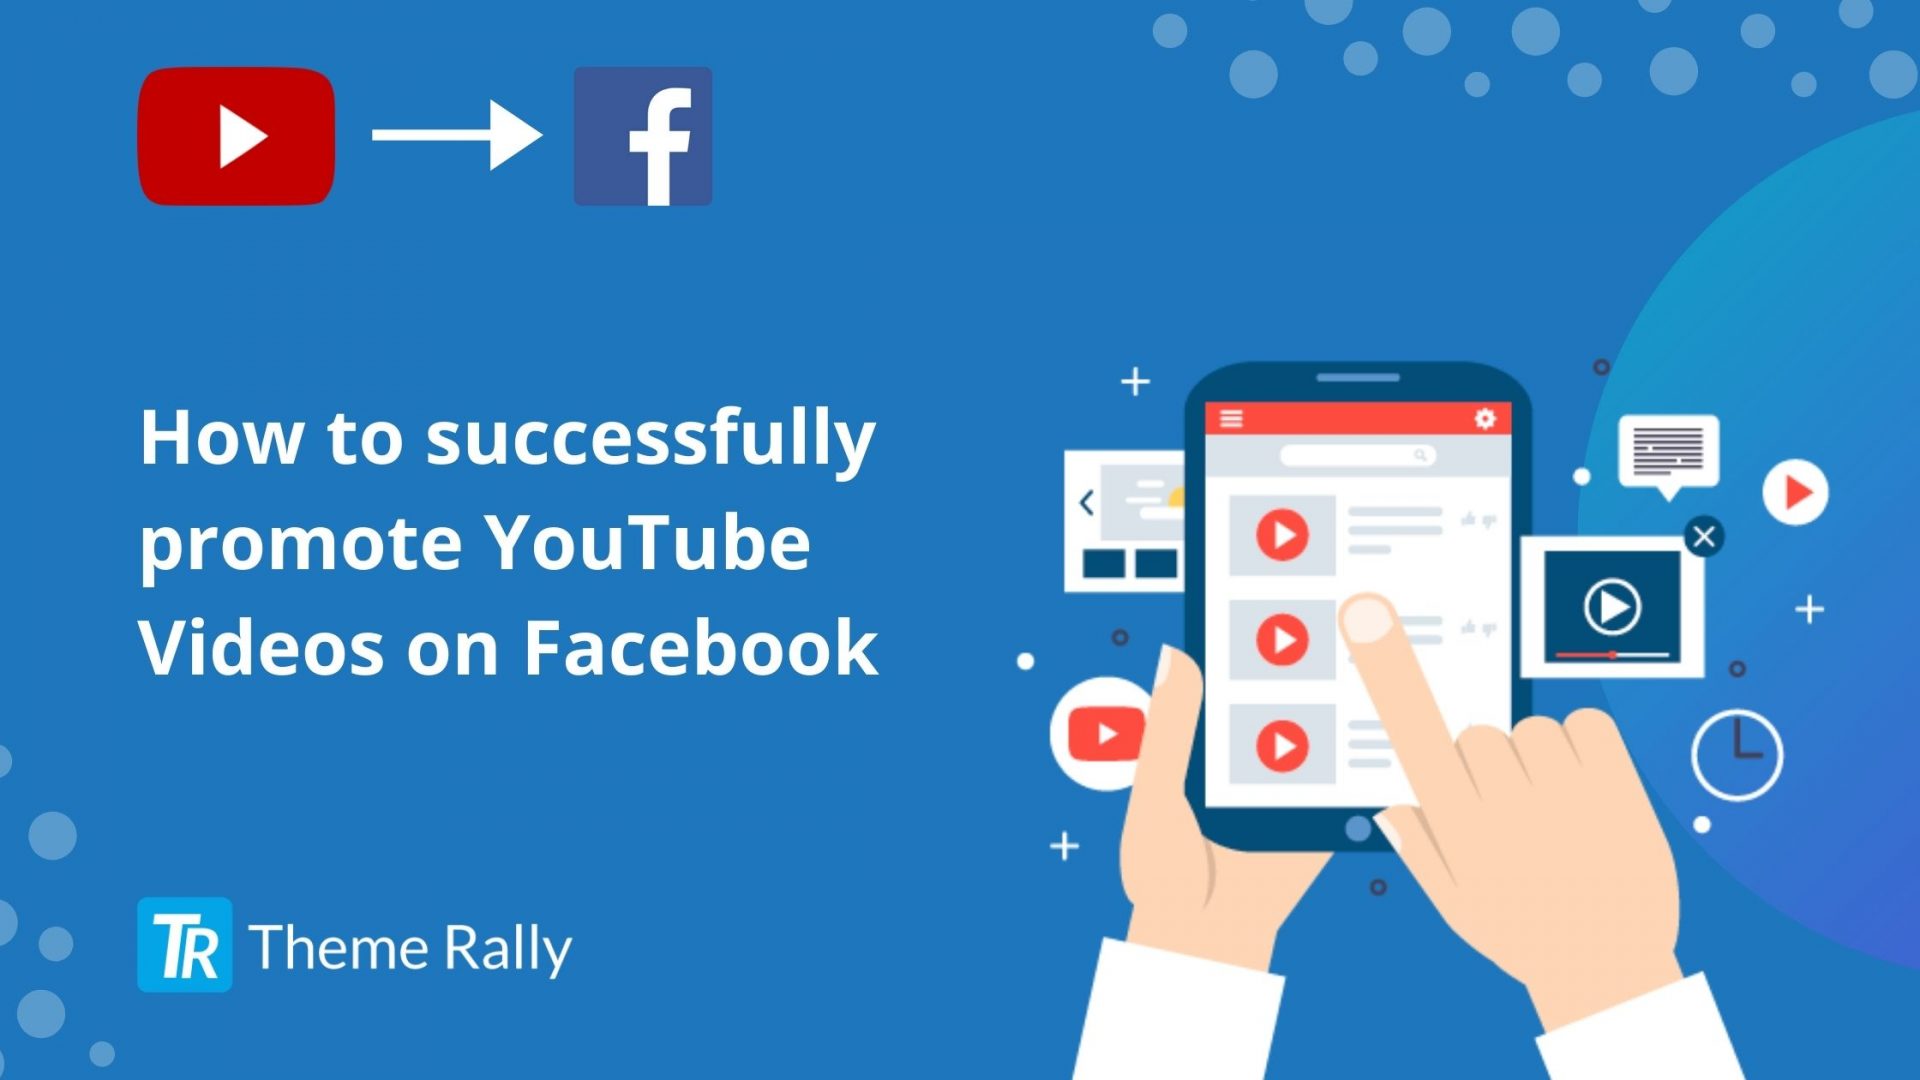 How to successfully promote YouTube Videos on Facebook